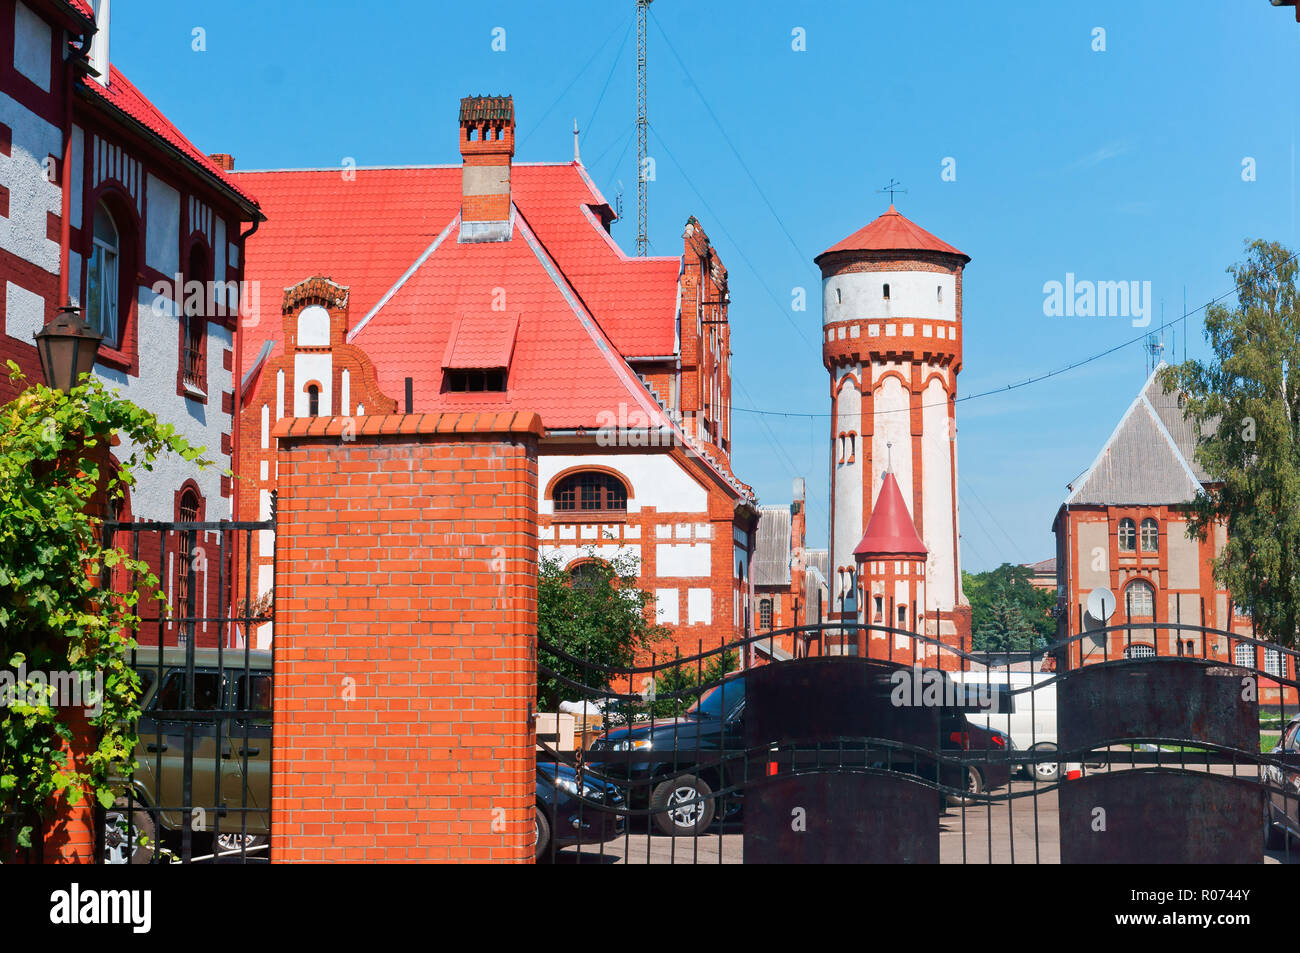 August 9, 2018, Kaliningrad region, Baltiysk, Russia,Water tower infantry barracks, the building of the Baltic fleet of the Russian Federation Stock Photo